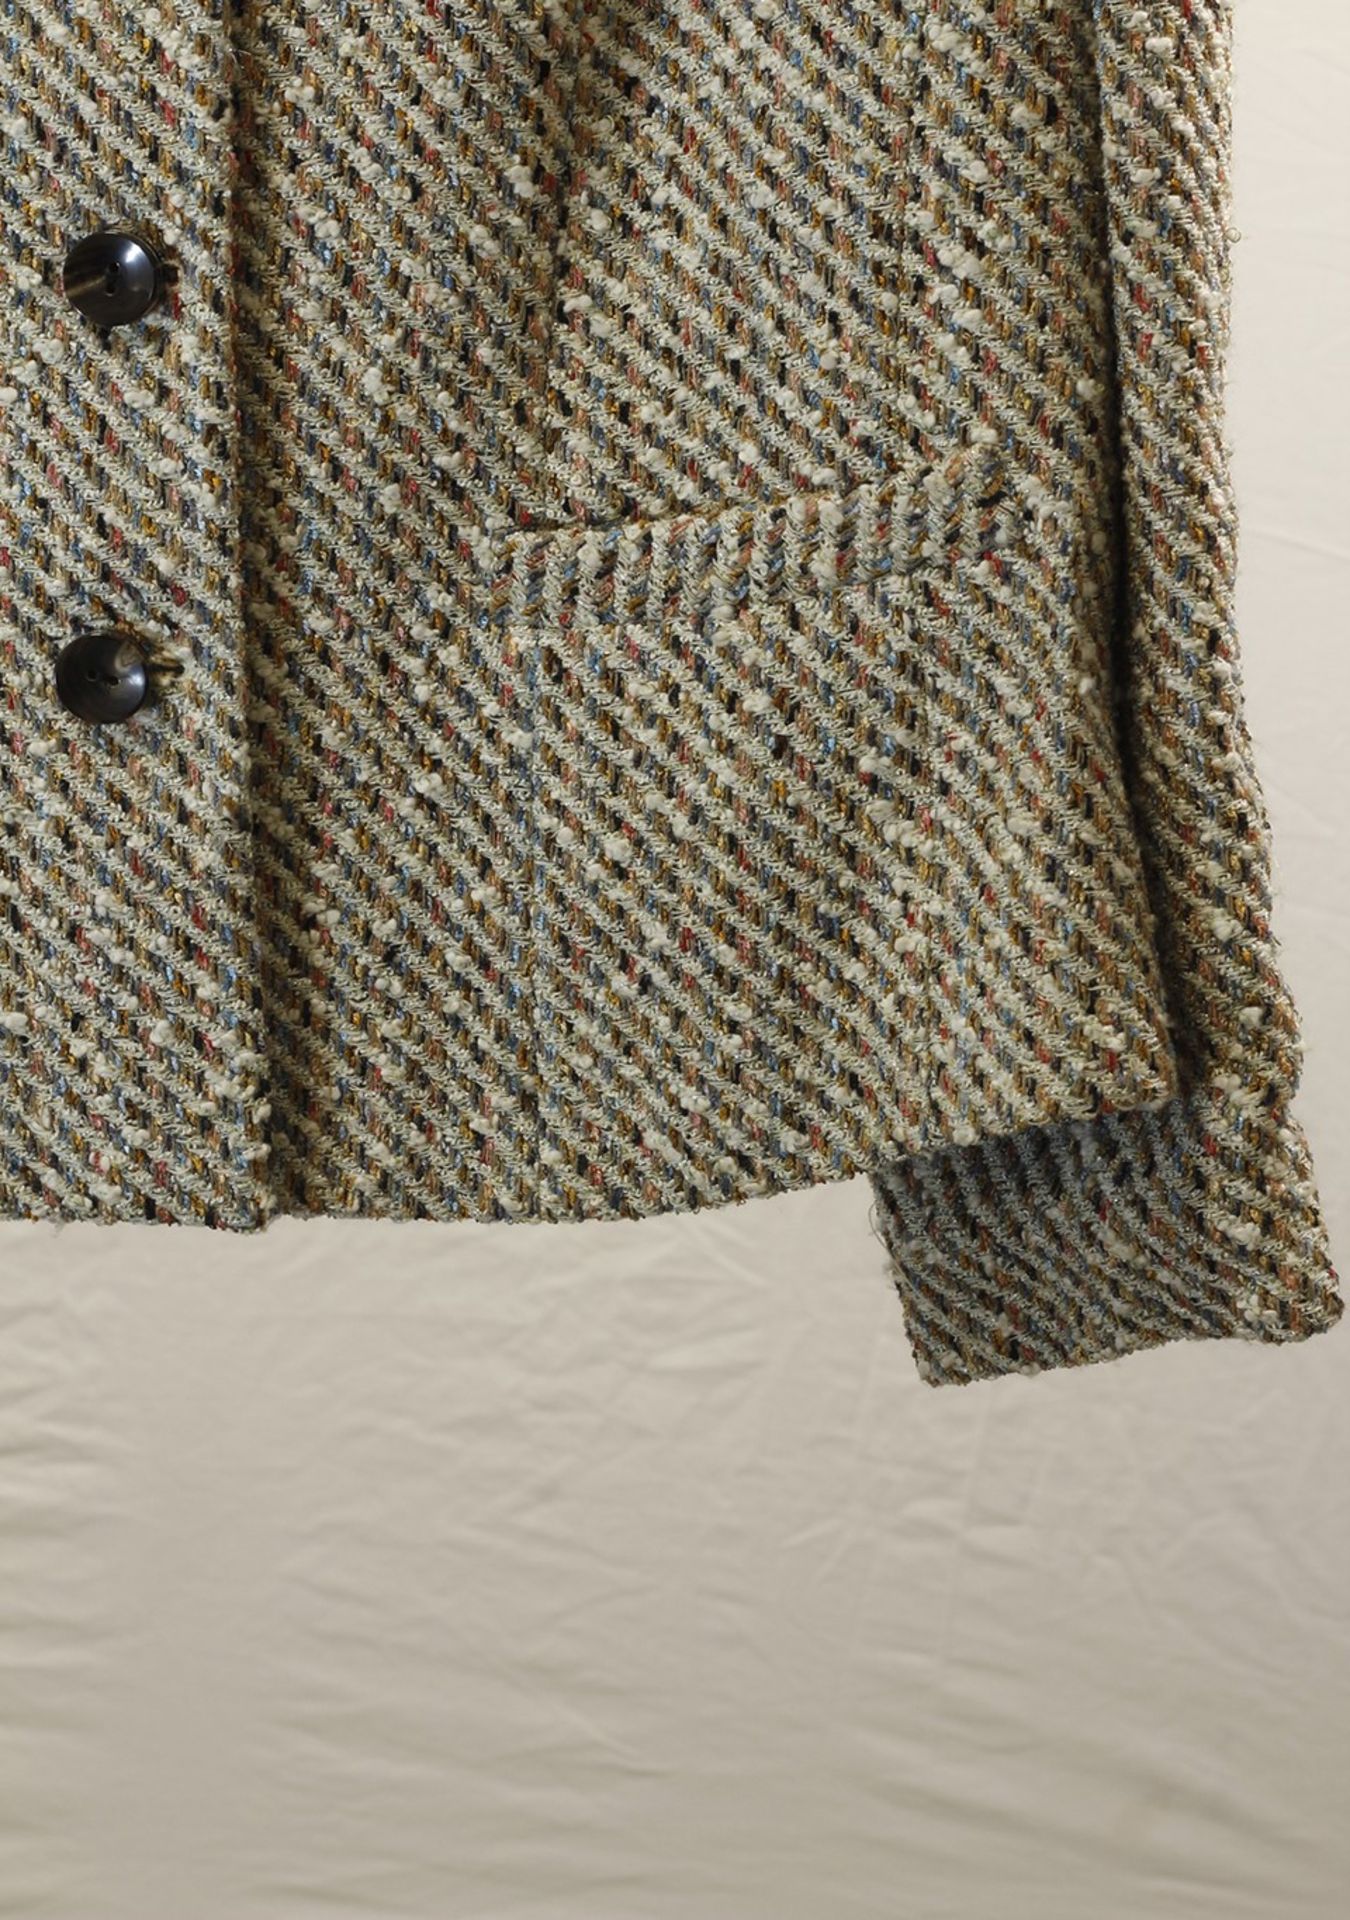 1 x Anne Belin Multicolour Tweed Jacket - Size: 24 - Material: 50% Polyacrylic, 25% Viscose, 25% - Image 5 of 6